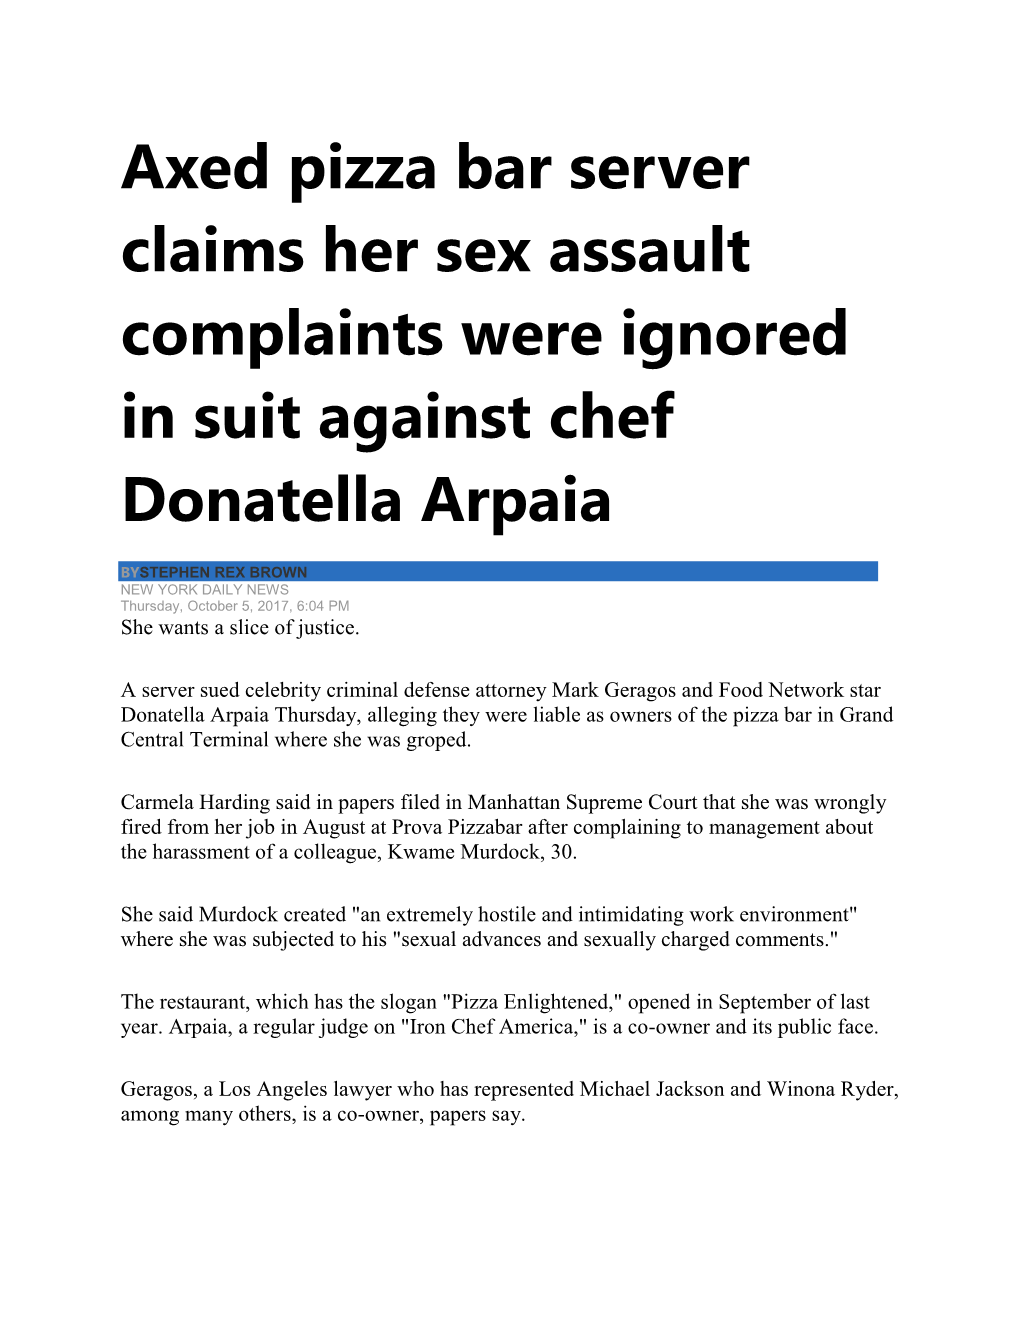 Axed Pizza Bar Server Claims Her Sex Assault Complaints Were Ignored in Suit Against Chef Donatella Arpaia